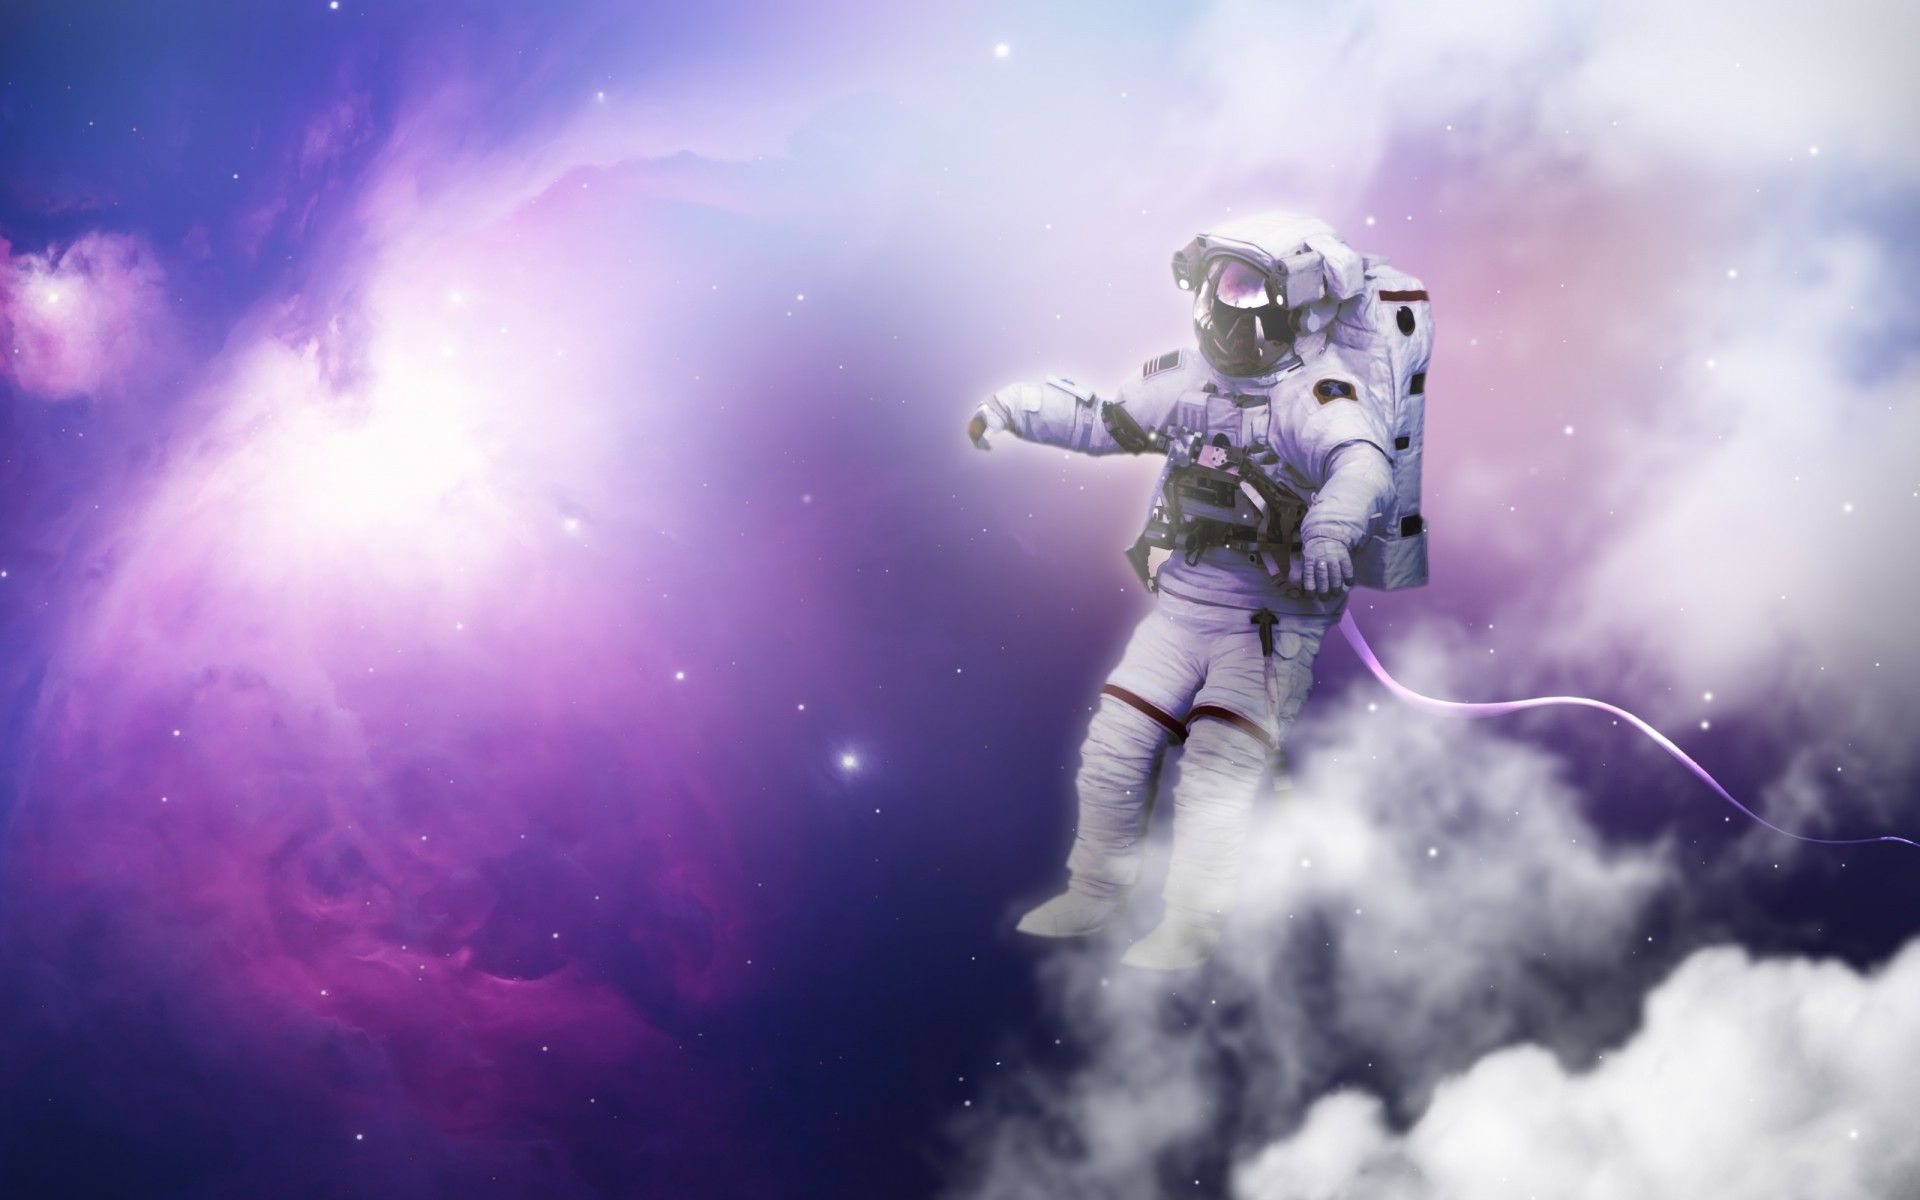 Astronaut 4K Wallpaper, Nebula, Clouds, Space travel, Space adventure, Space